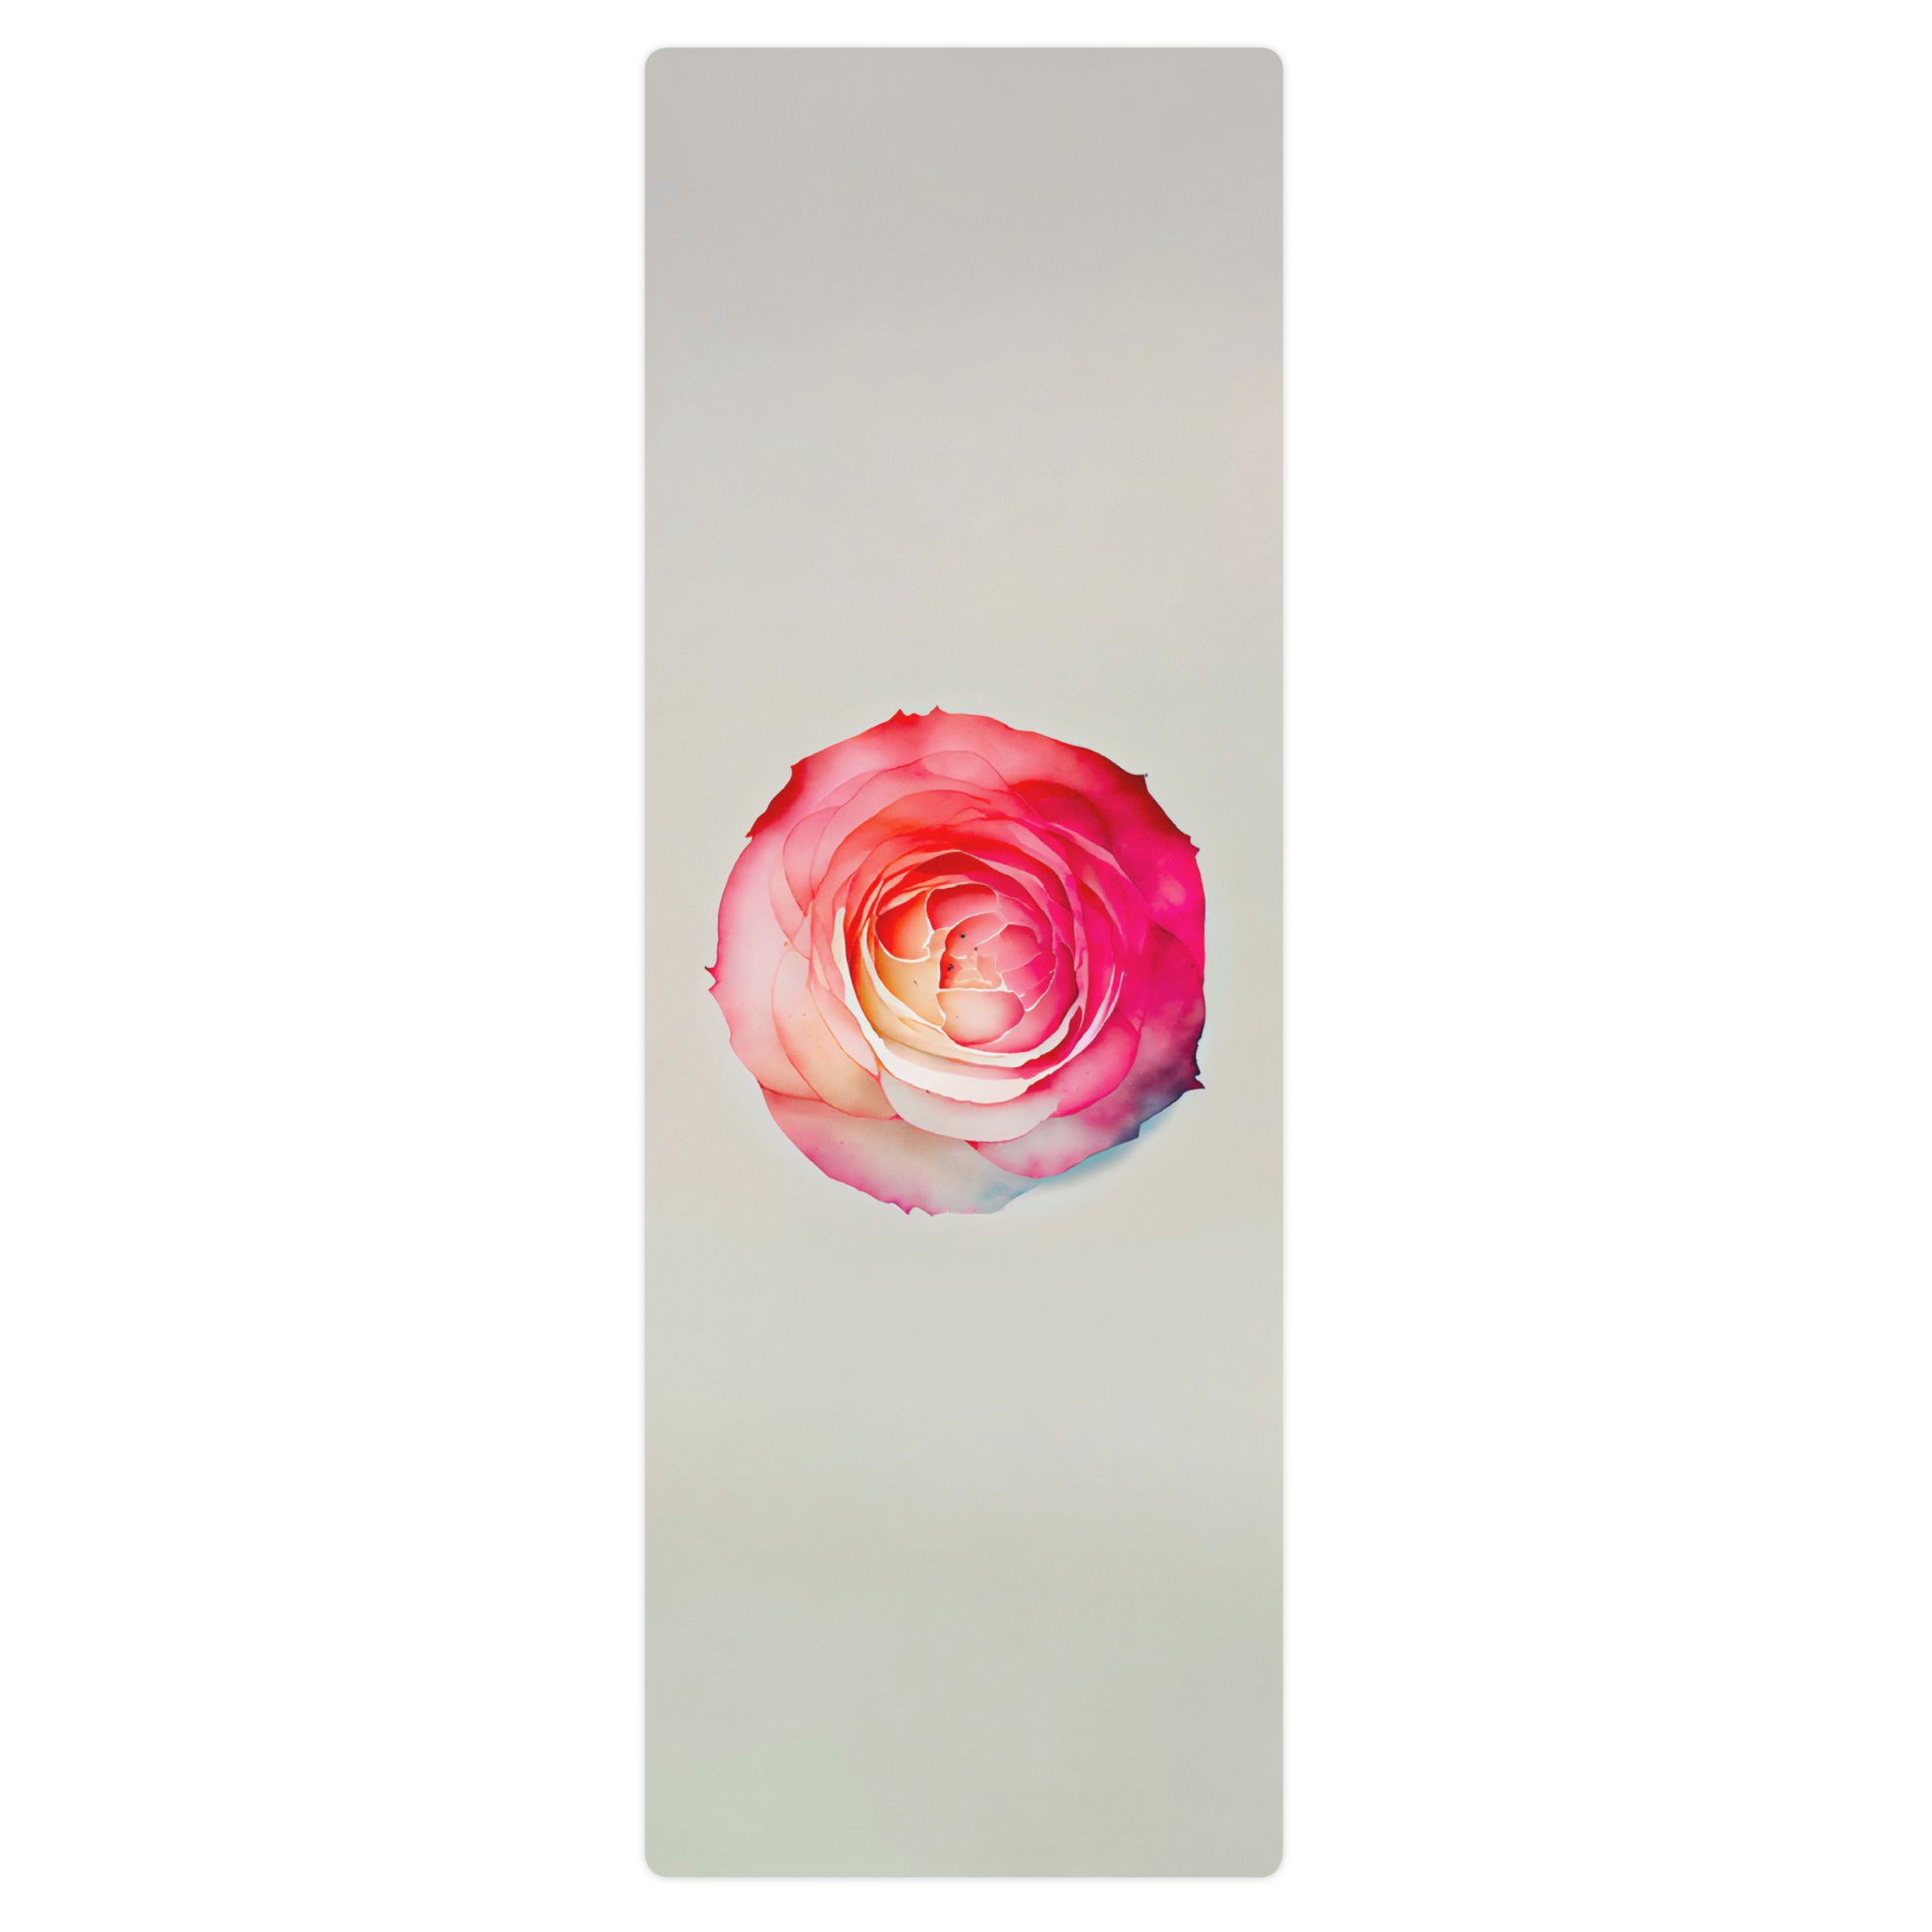 Pink Rose Yoga Mat: Blossom in Your Practice